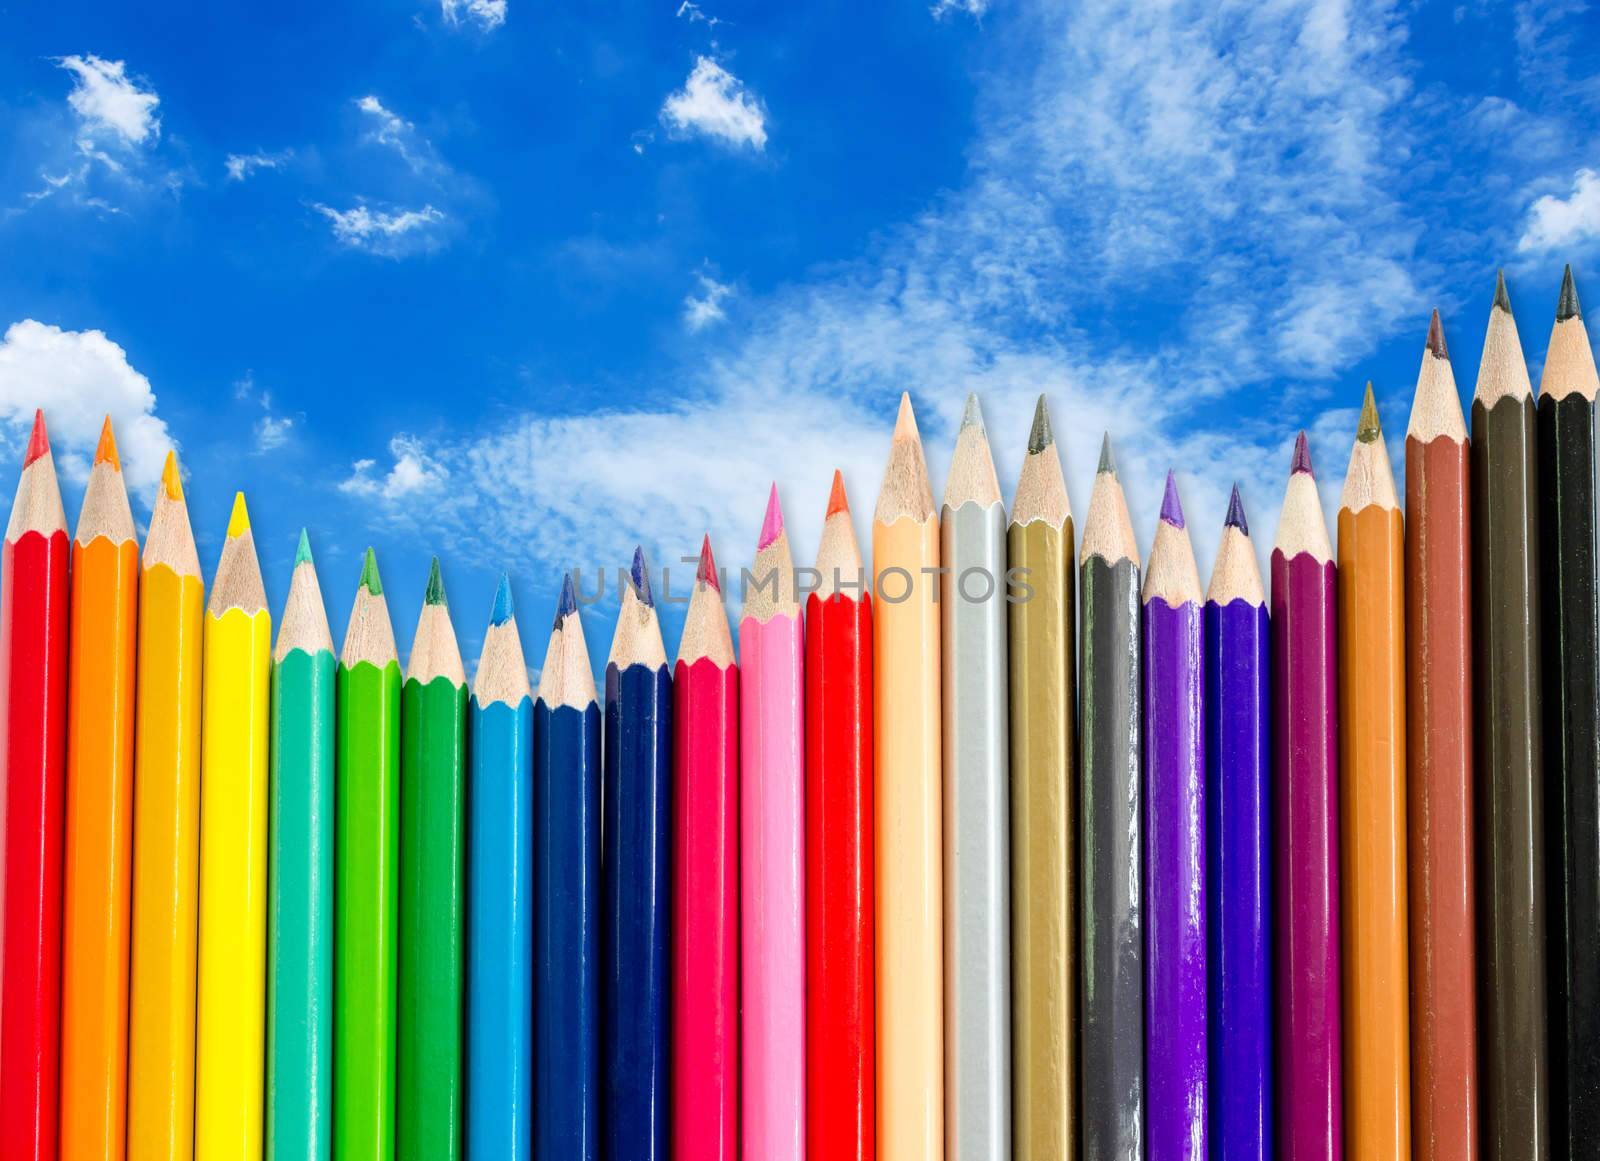 line of colored pencils on blue background, save clipping path.